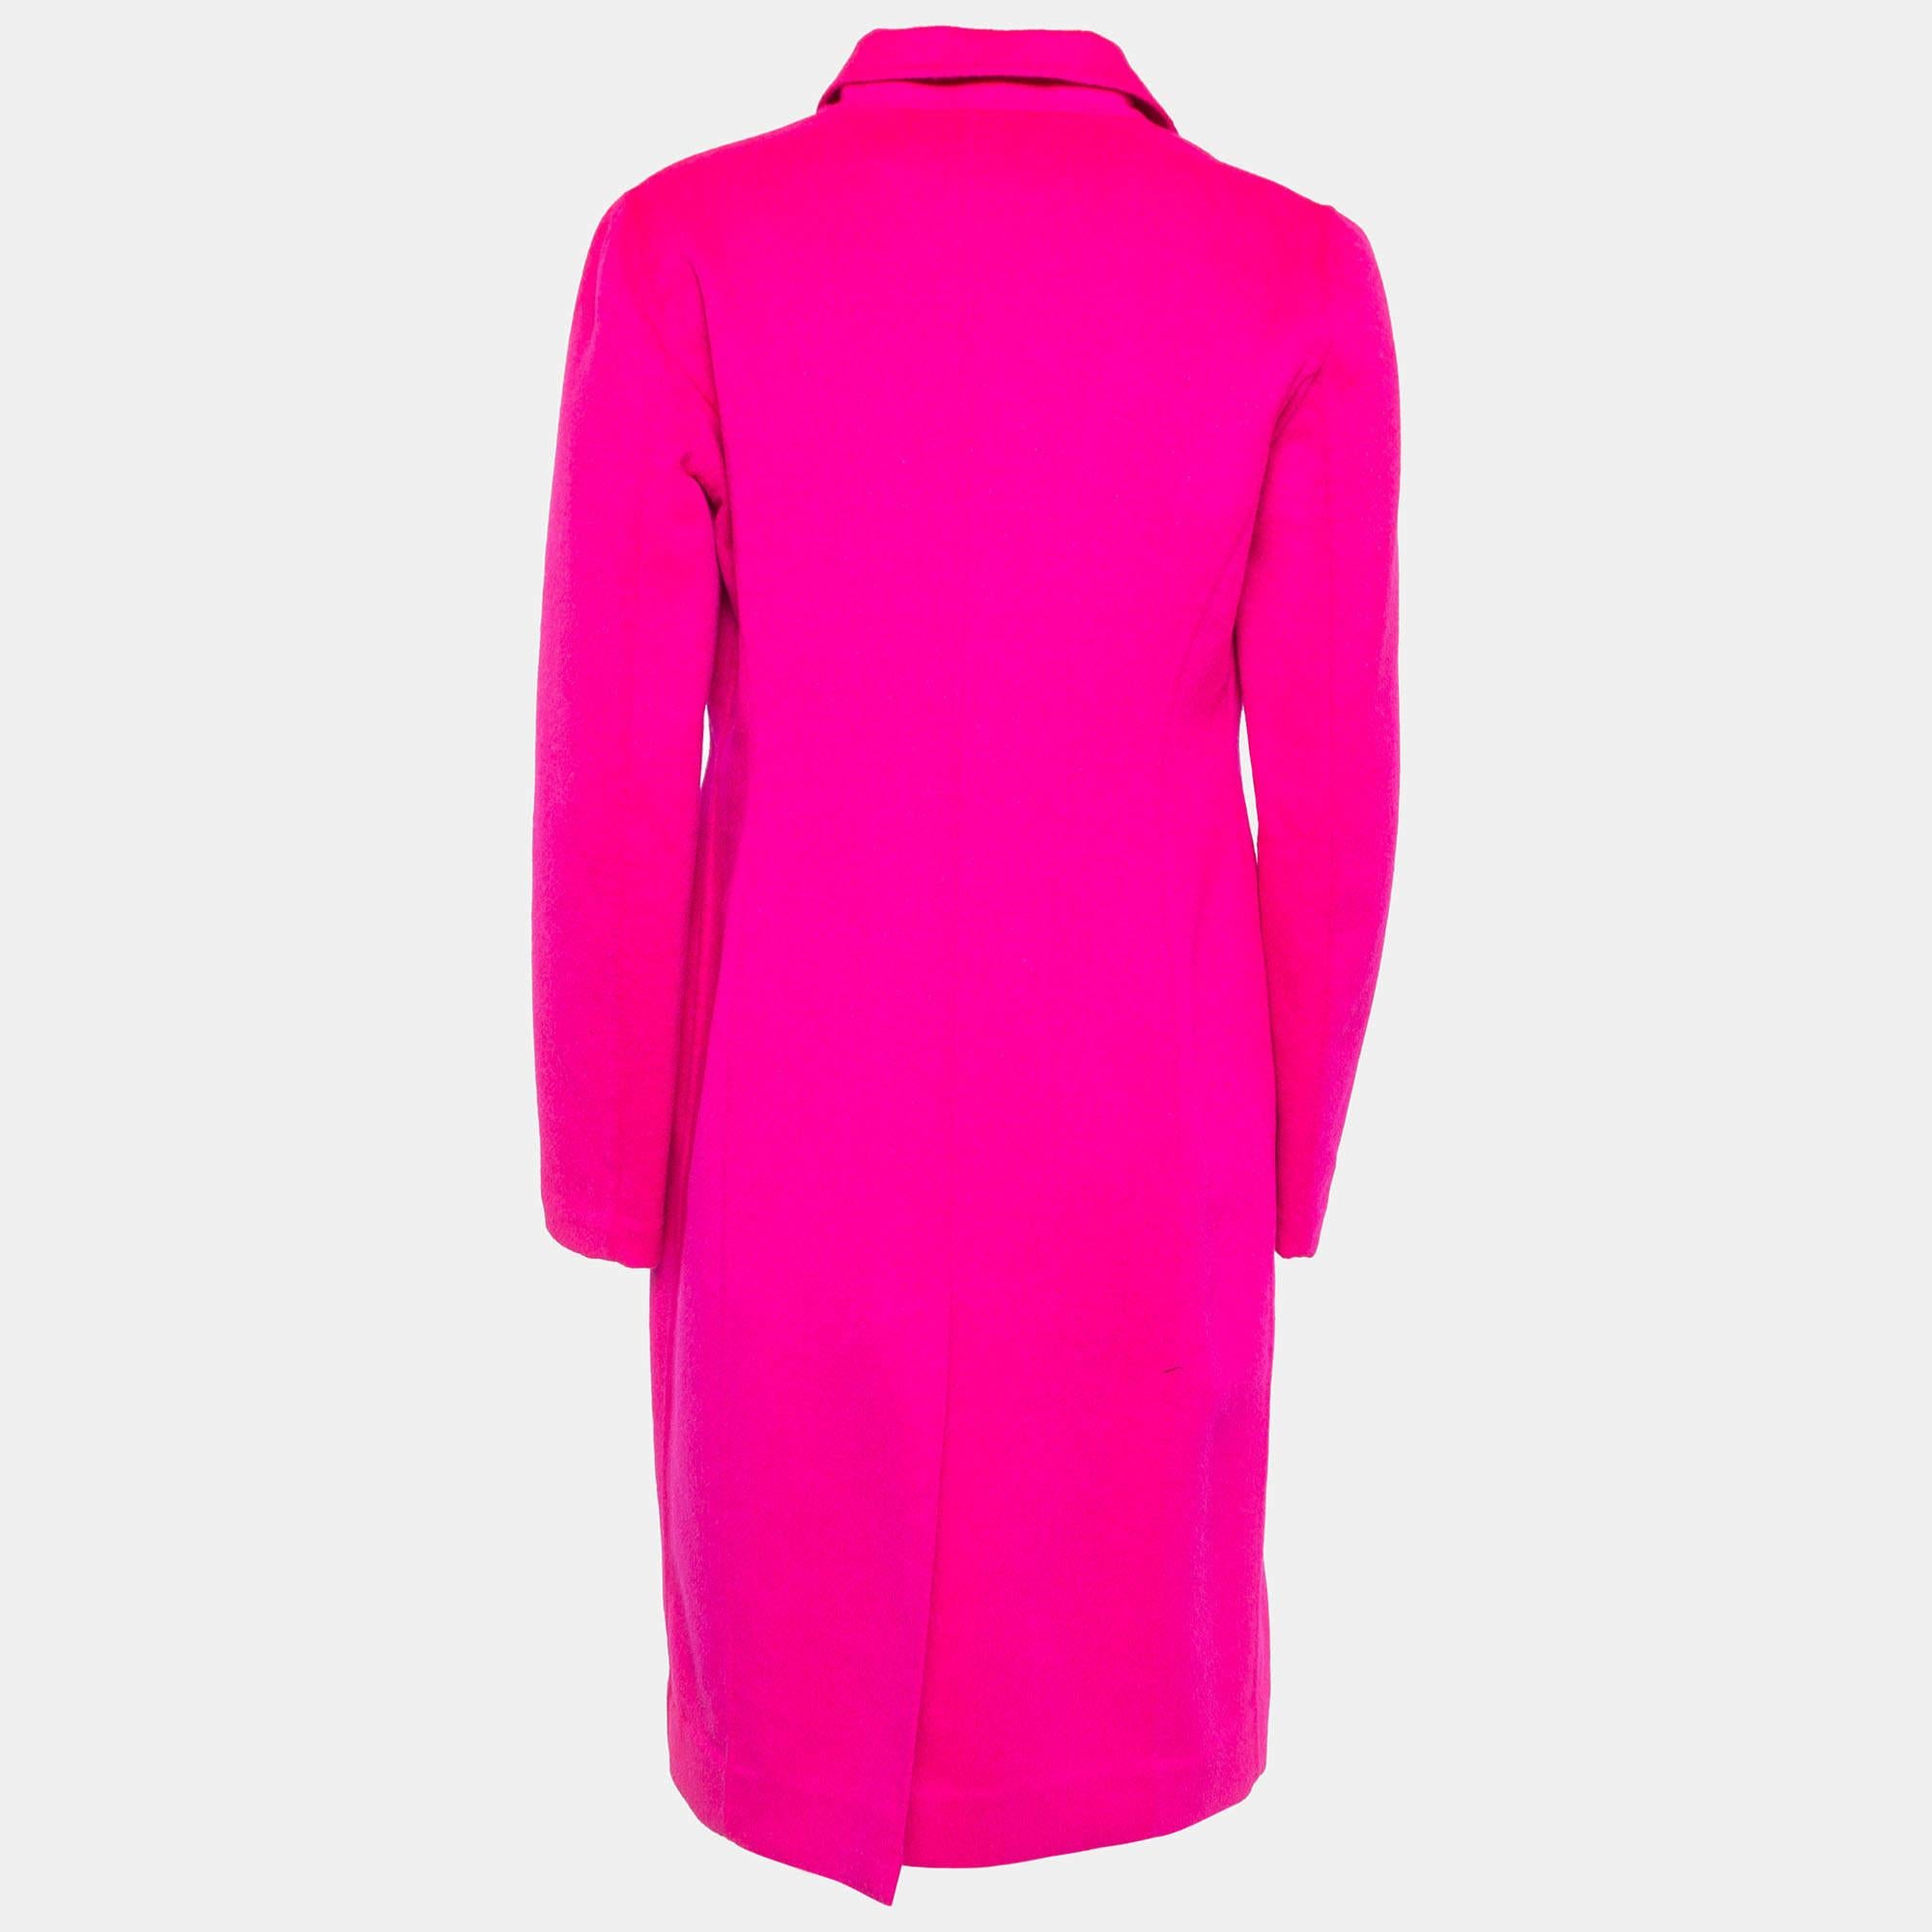 Envelop yourself in the timeless charm of the Dior coat. Crafted with finesse, its soft wool blend fabric drapes gracefully, while the double-breasted design adds a touch of classic sophistication. This coat effortlessly blends warmth with style,